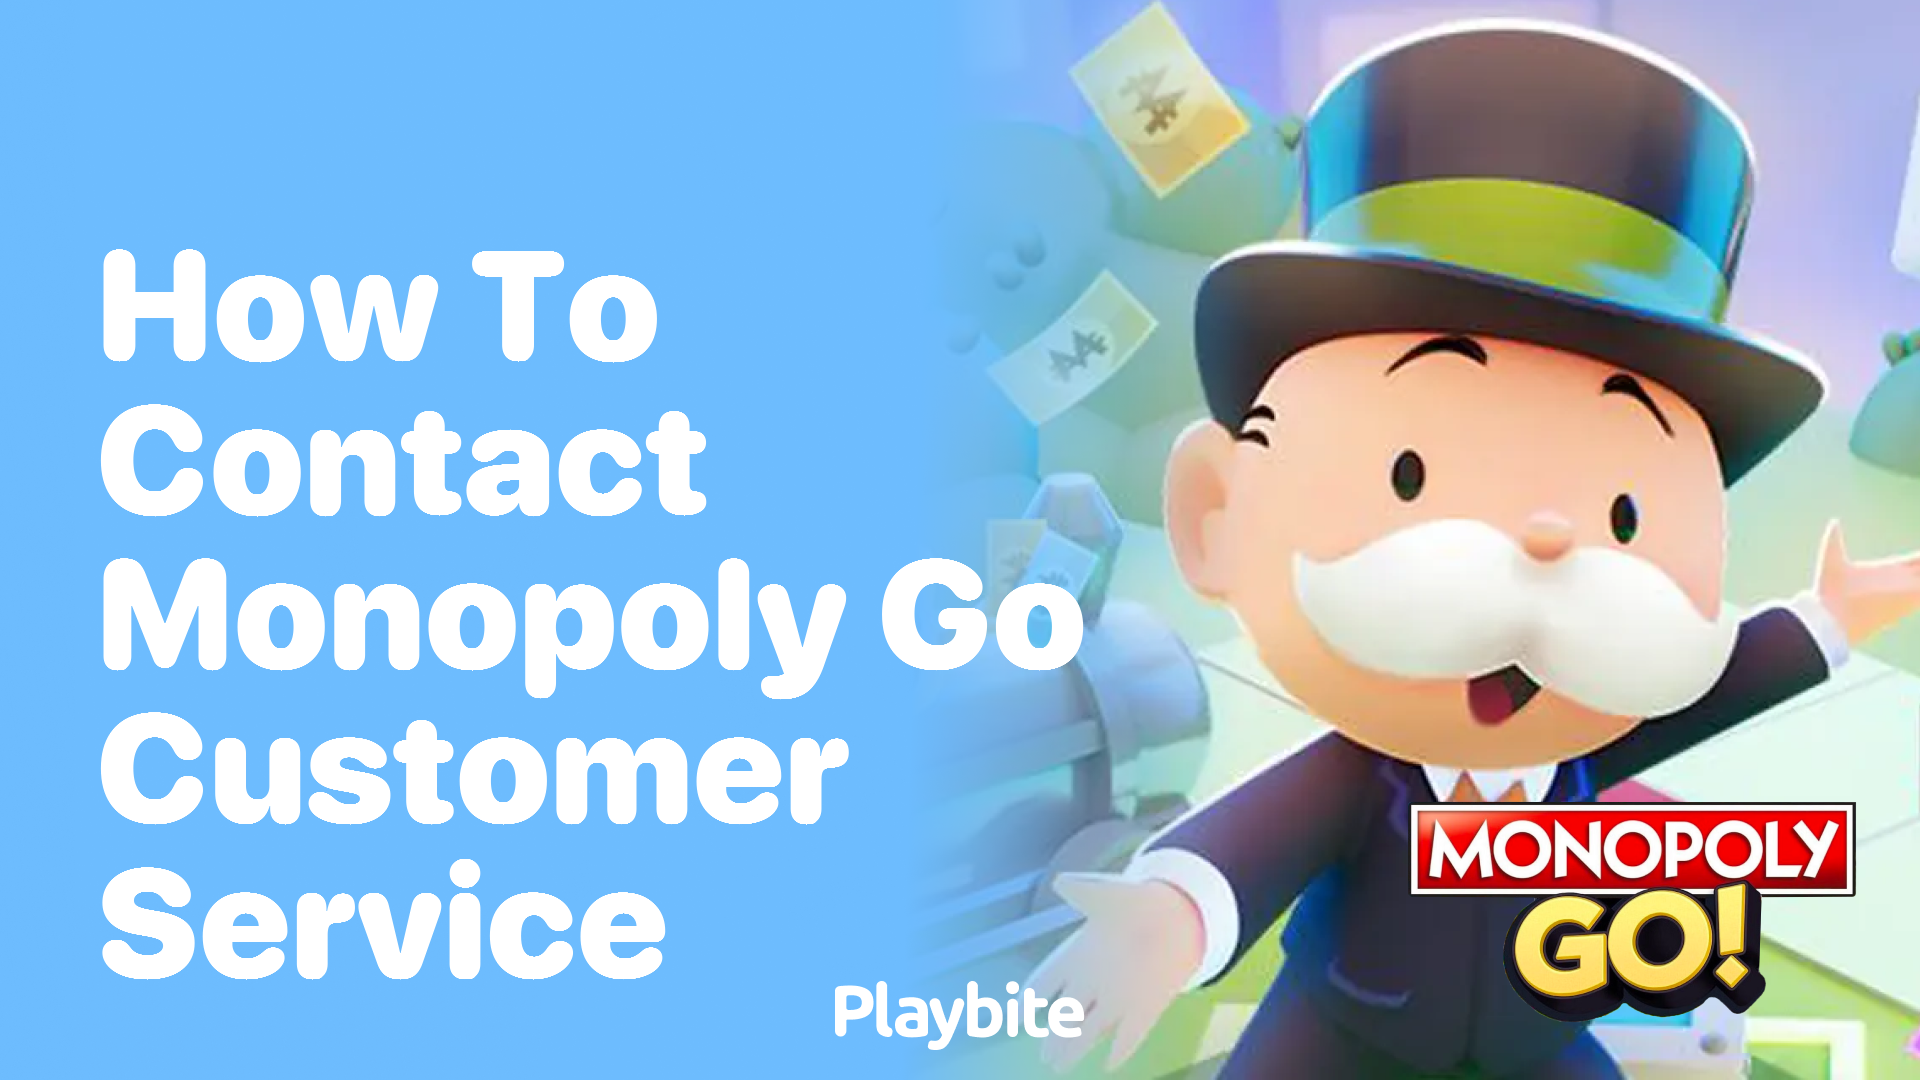 How to Contact Monopoly Go Customer Service for Help